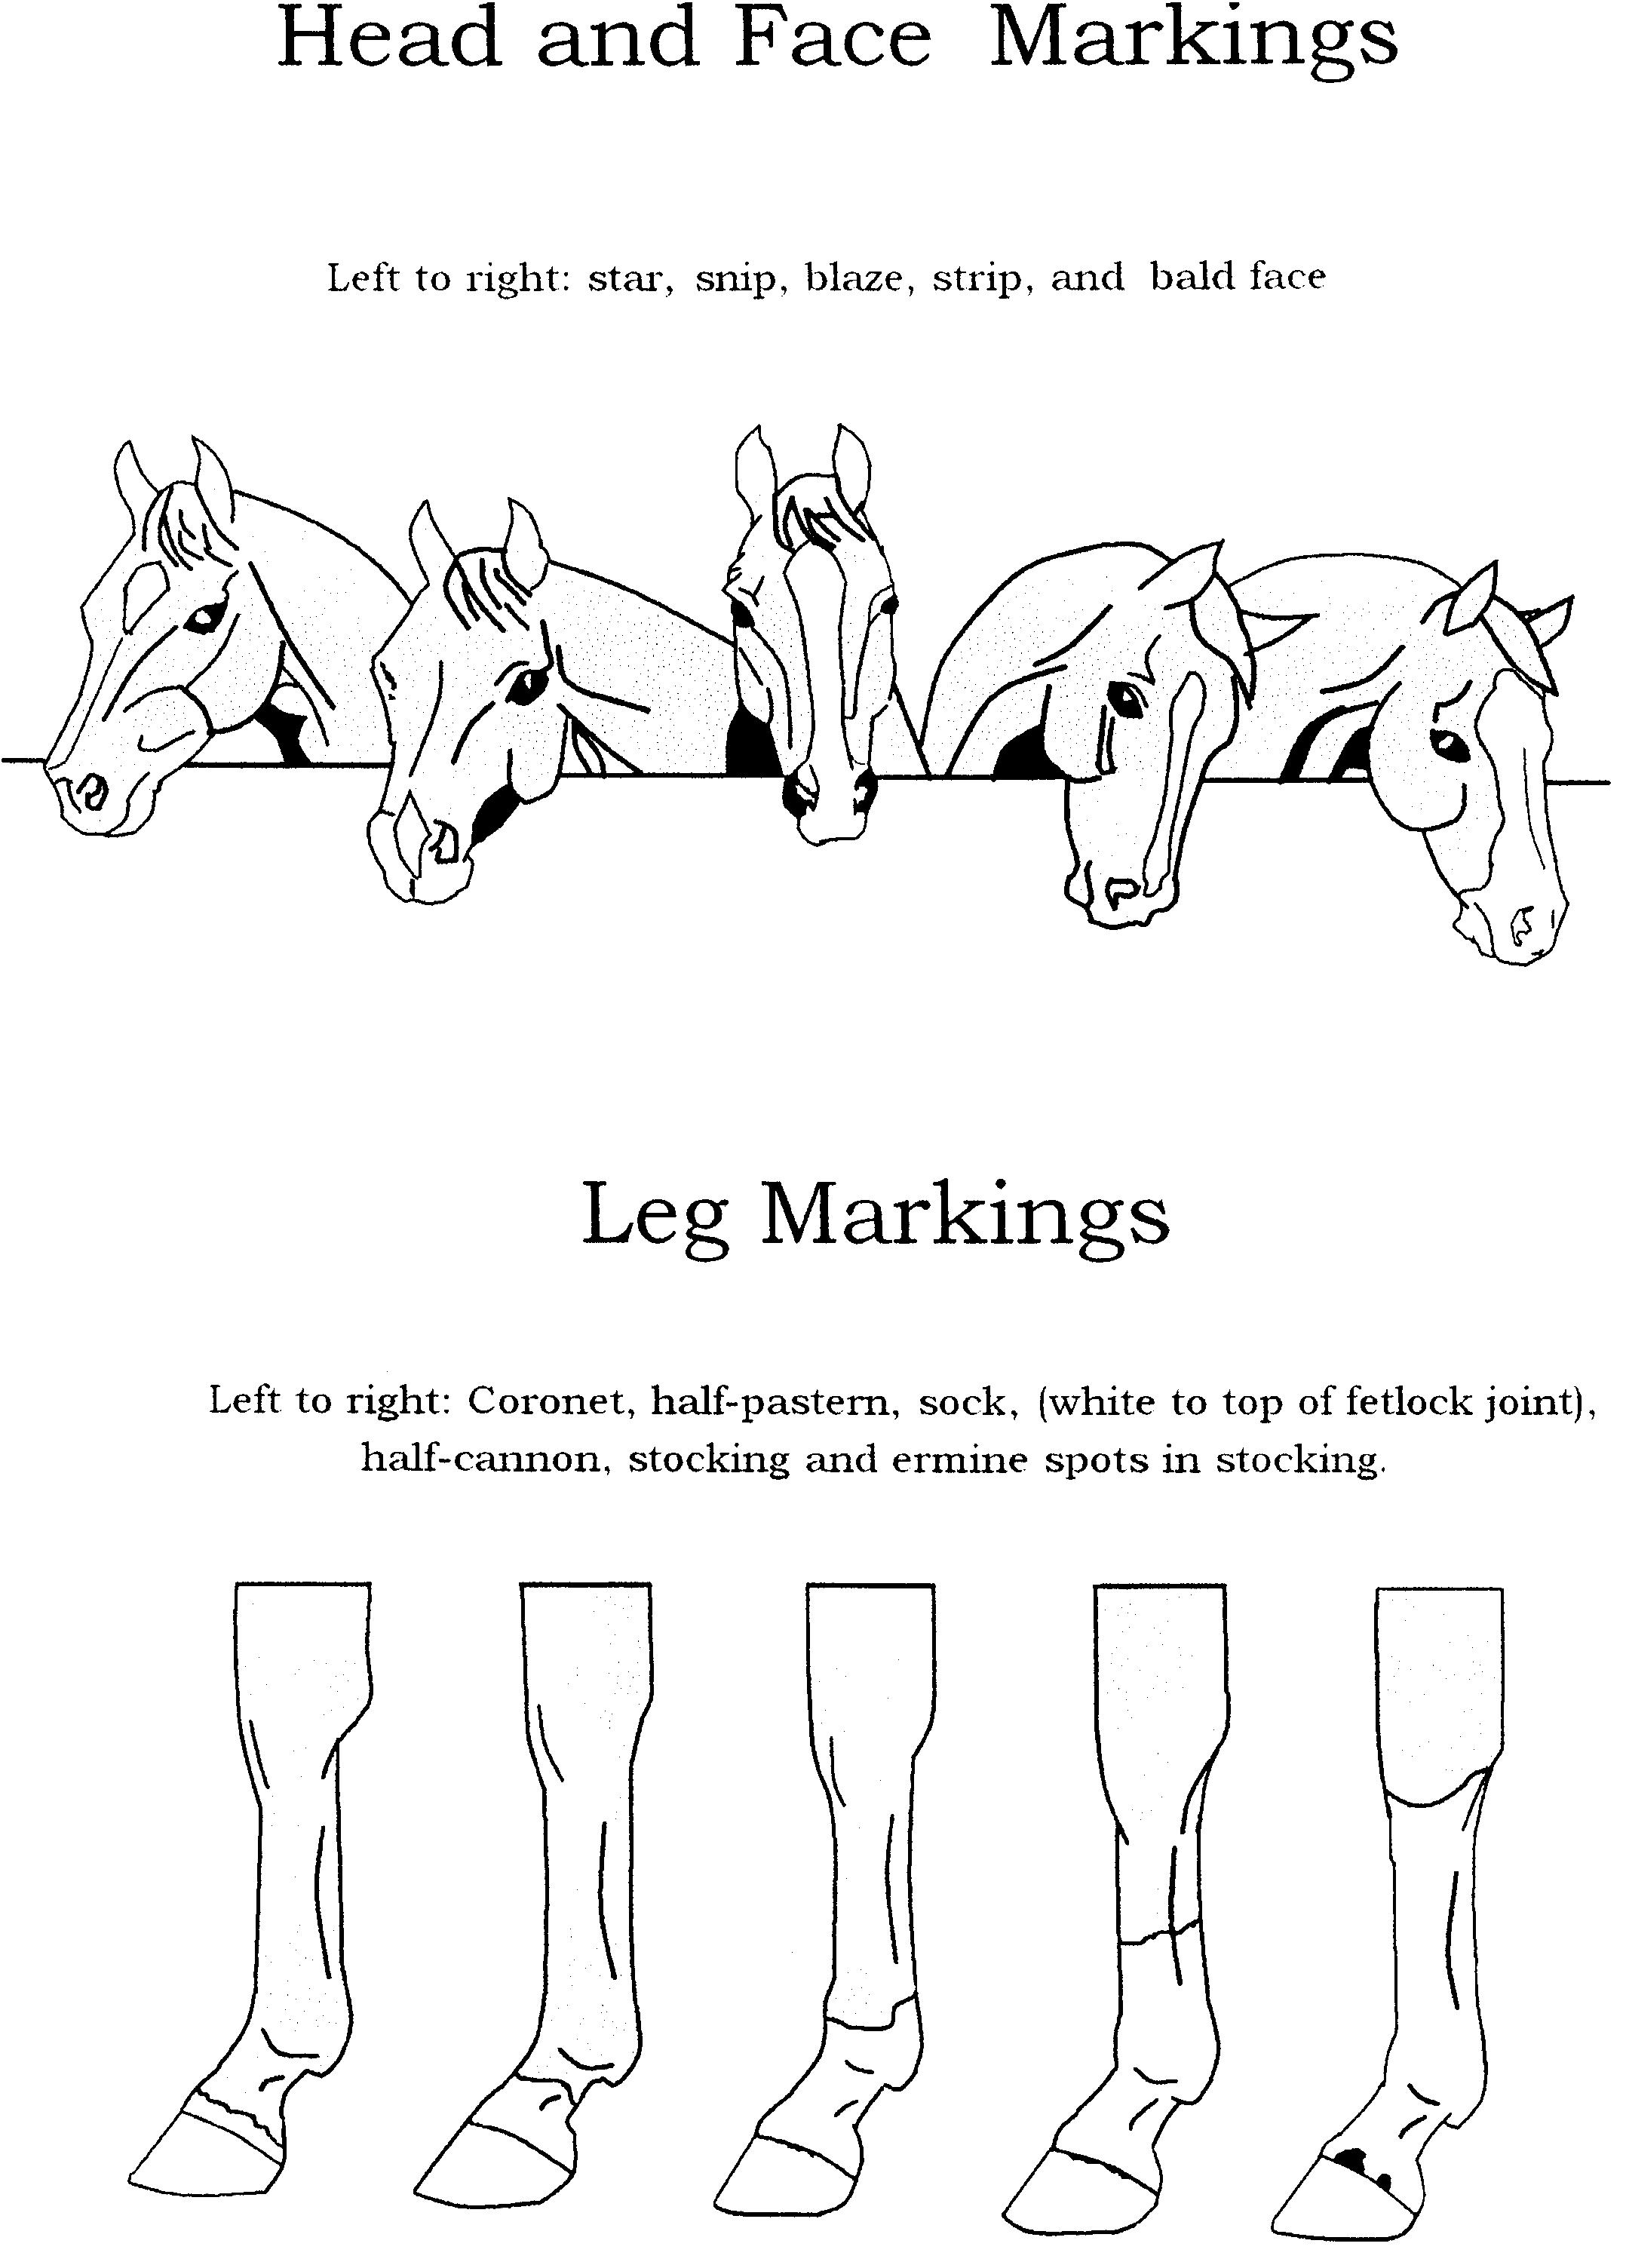 16 Best Images Of Horse Knowledge Worksheets Horse Face Markings And 